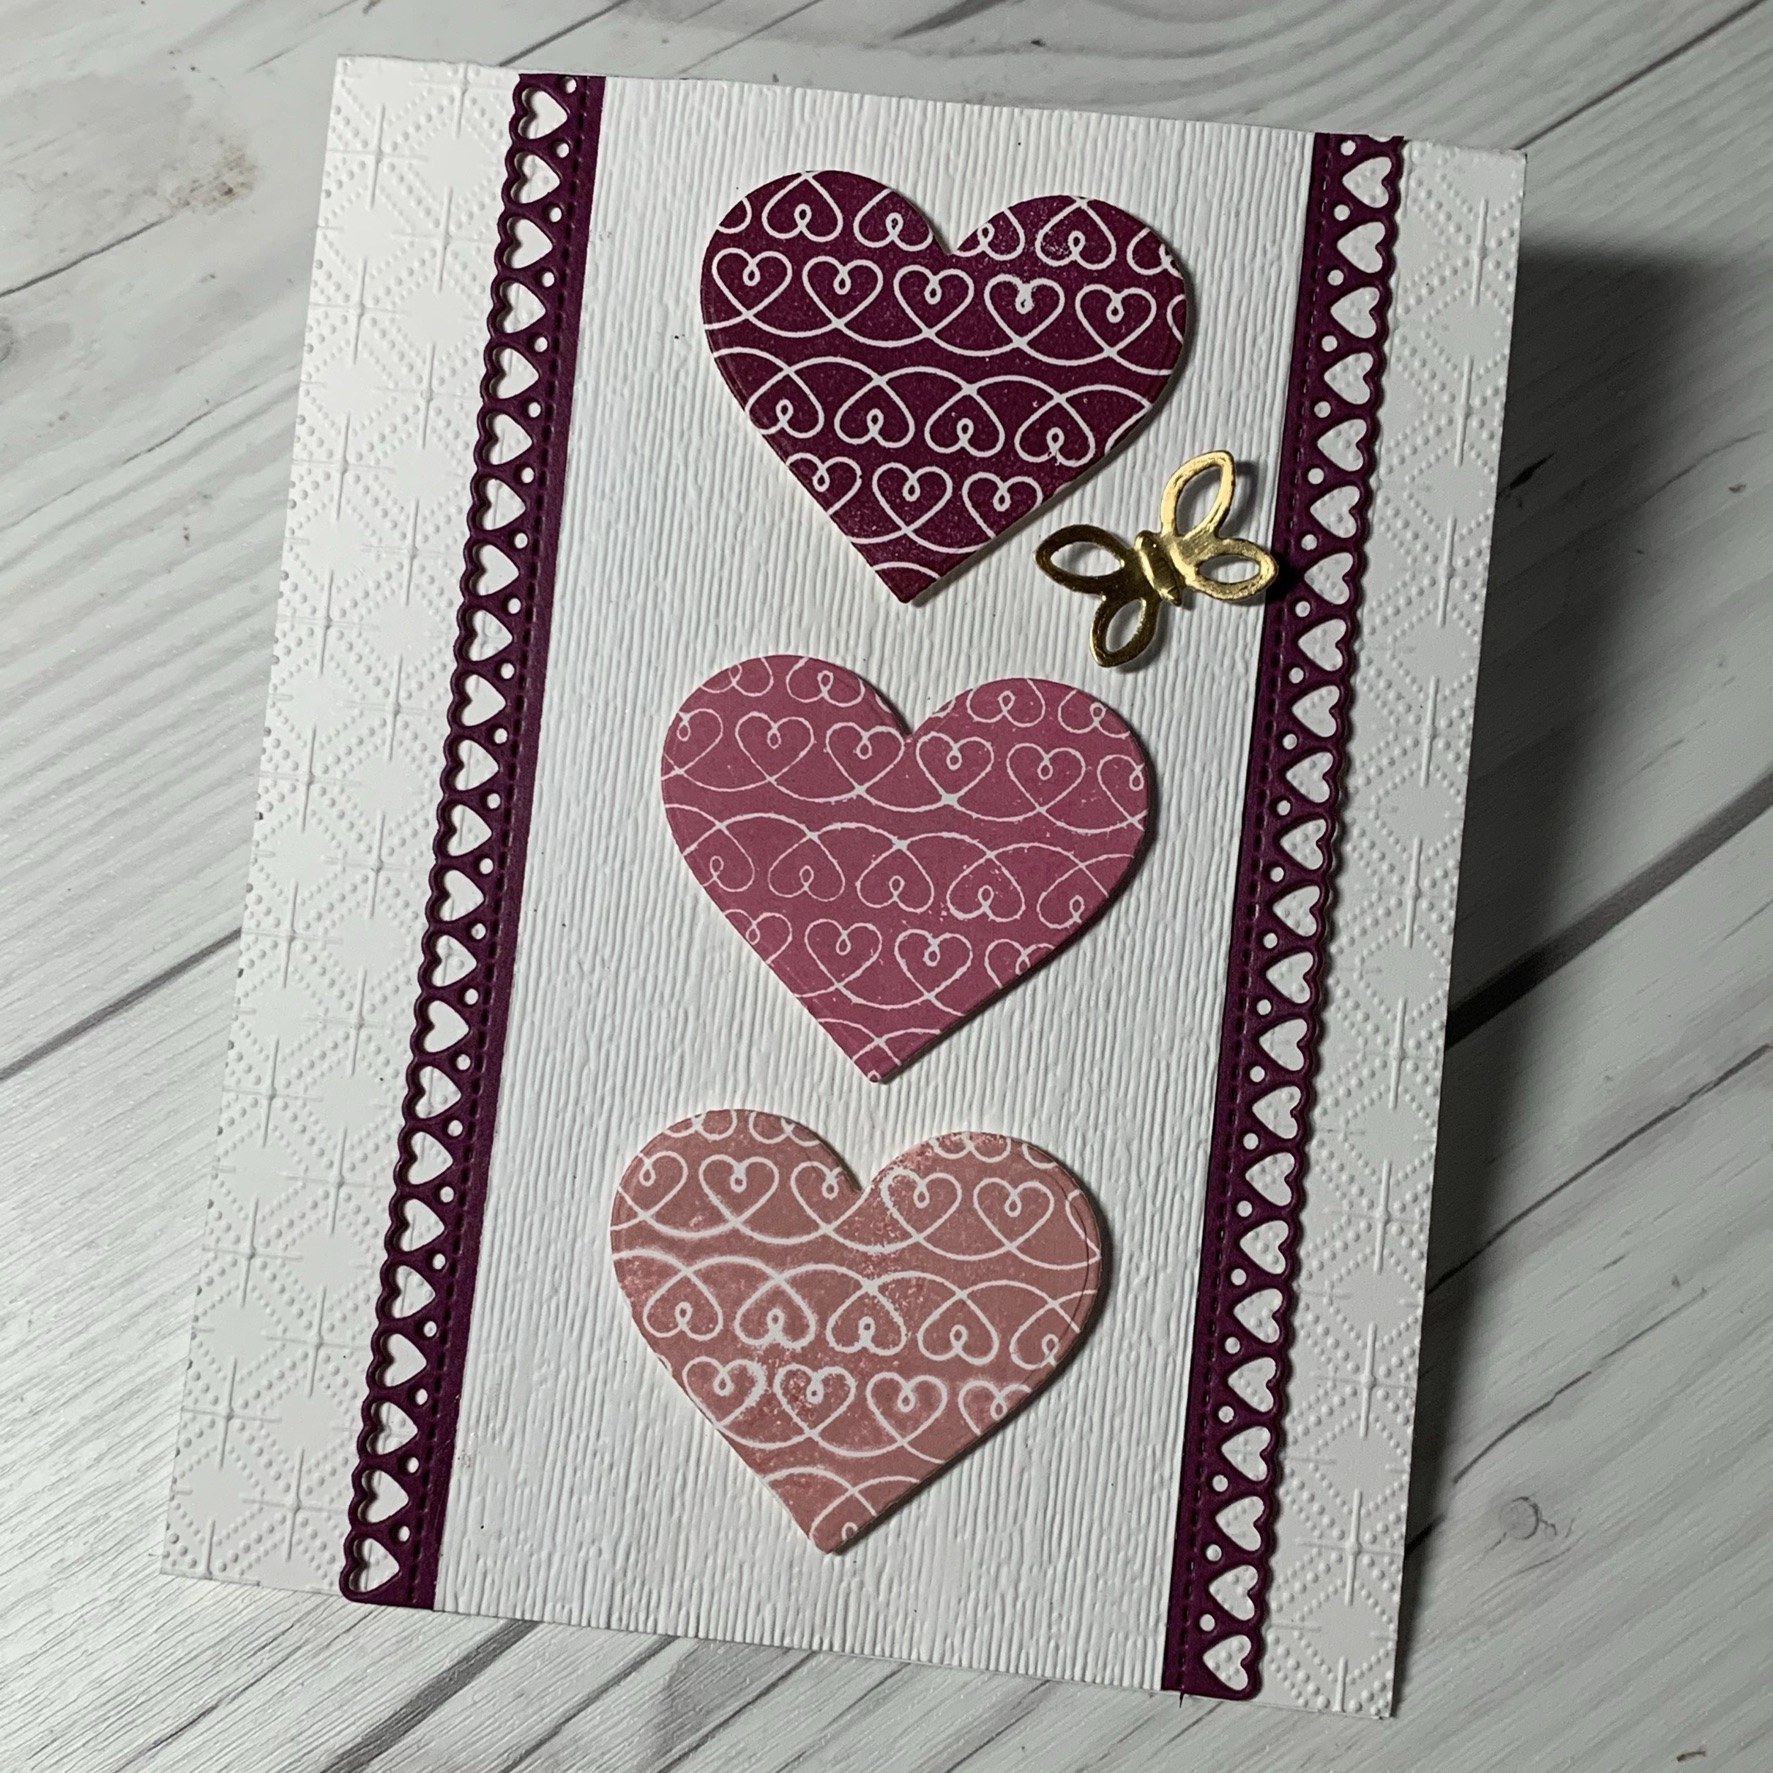 Stamped Sophisticates: Simple Valentine Card using Stampin' Up! Lots of  Heart Bundle